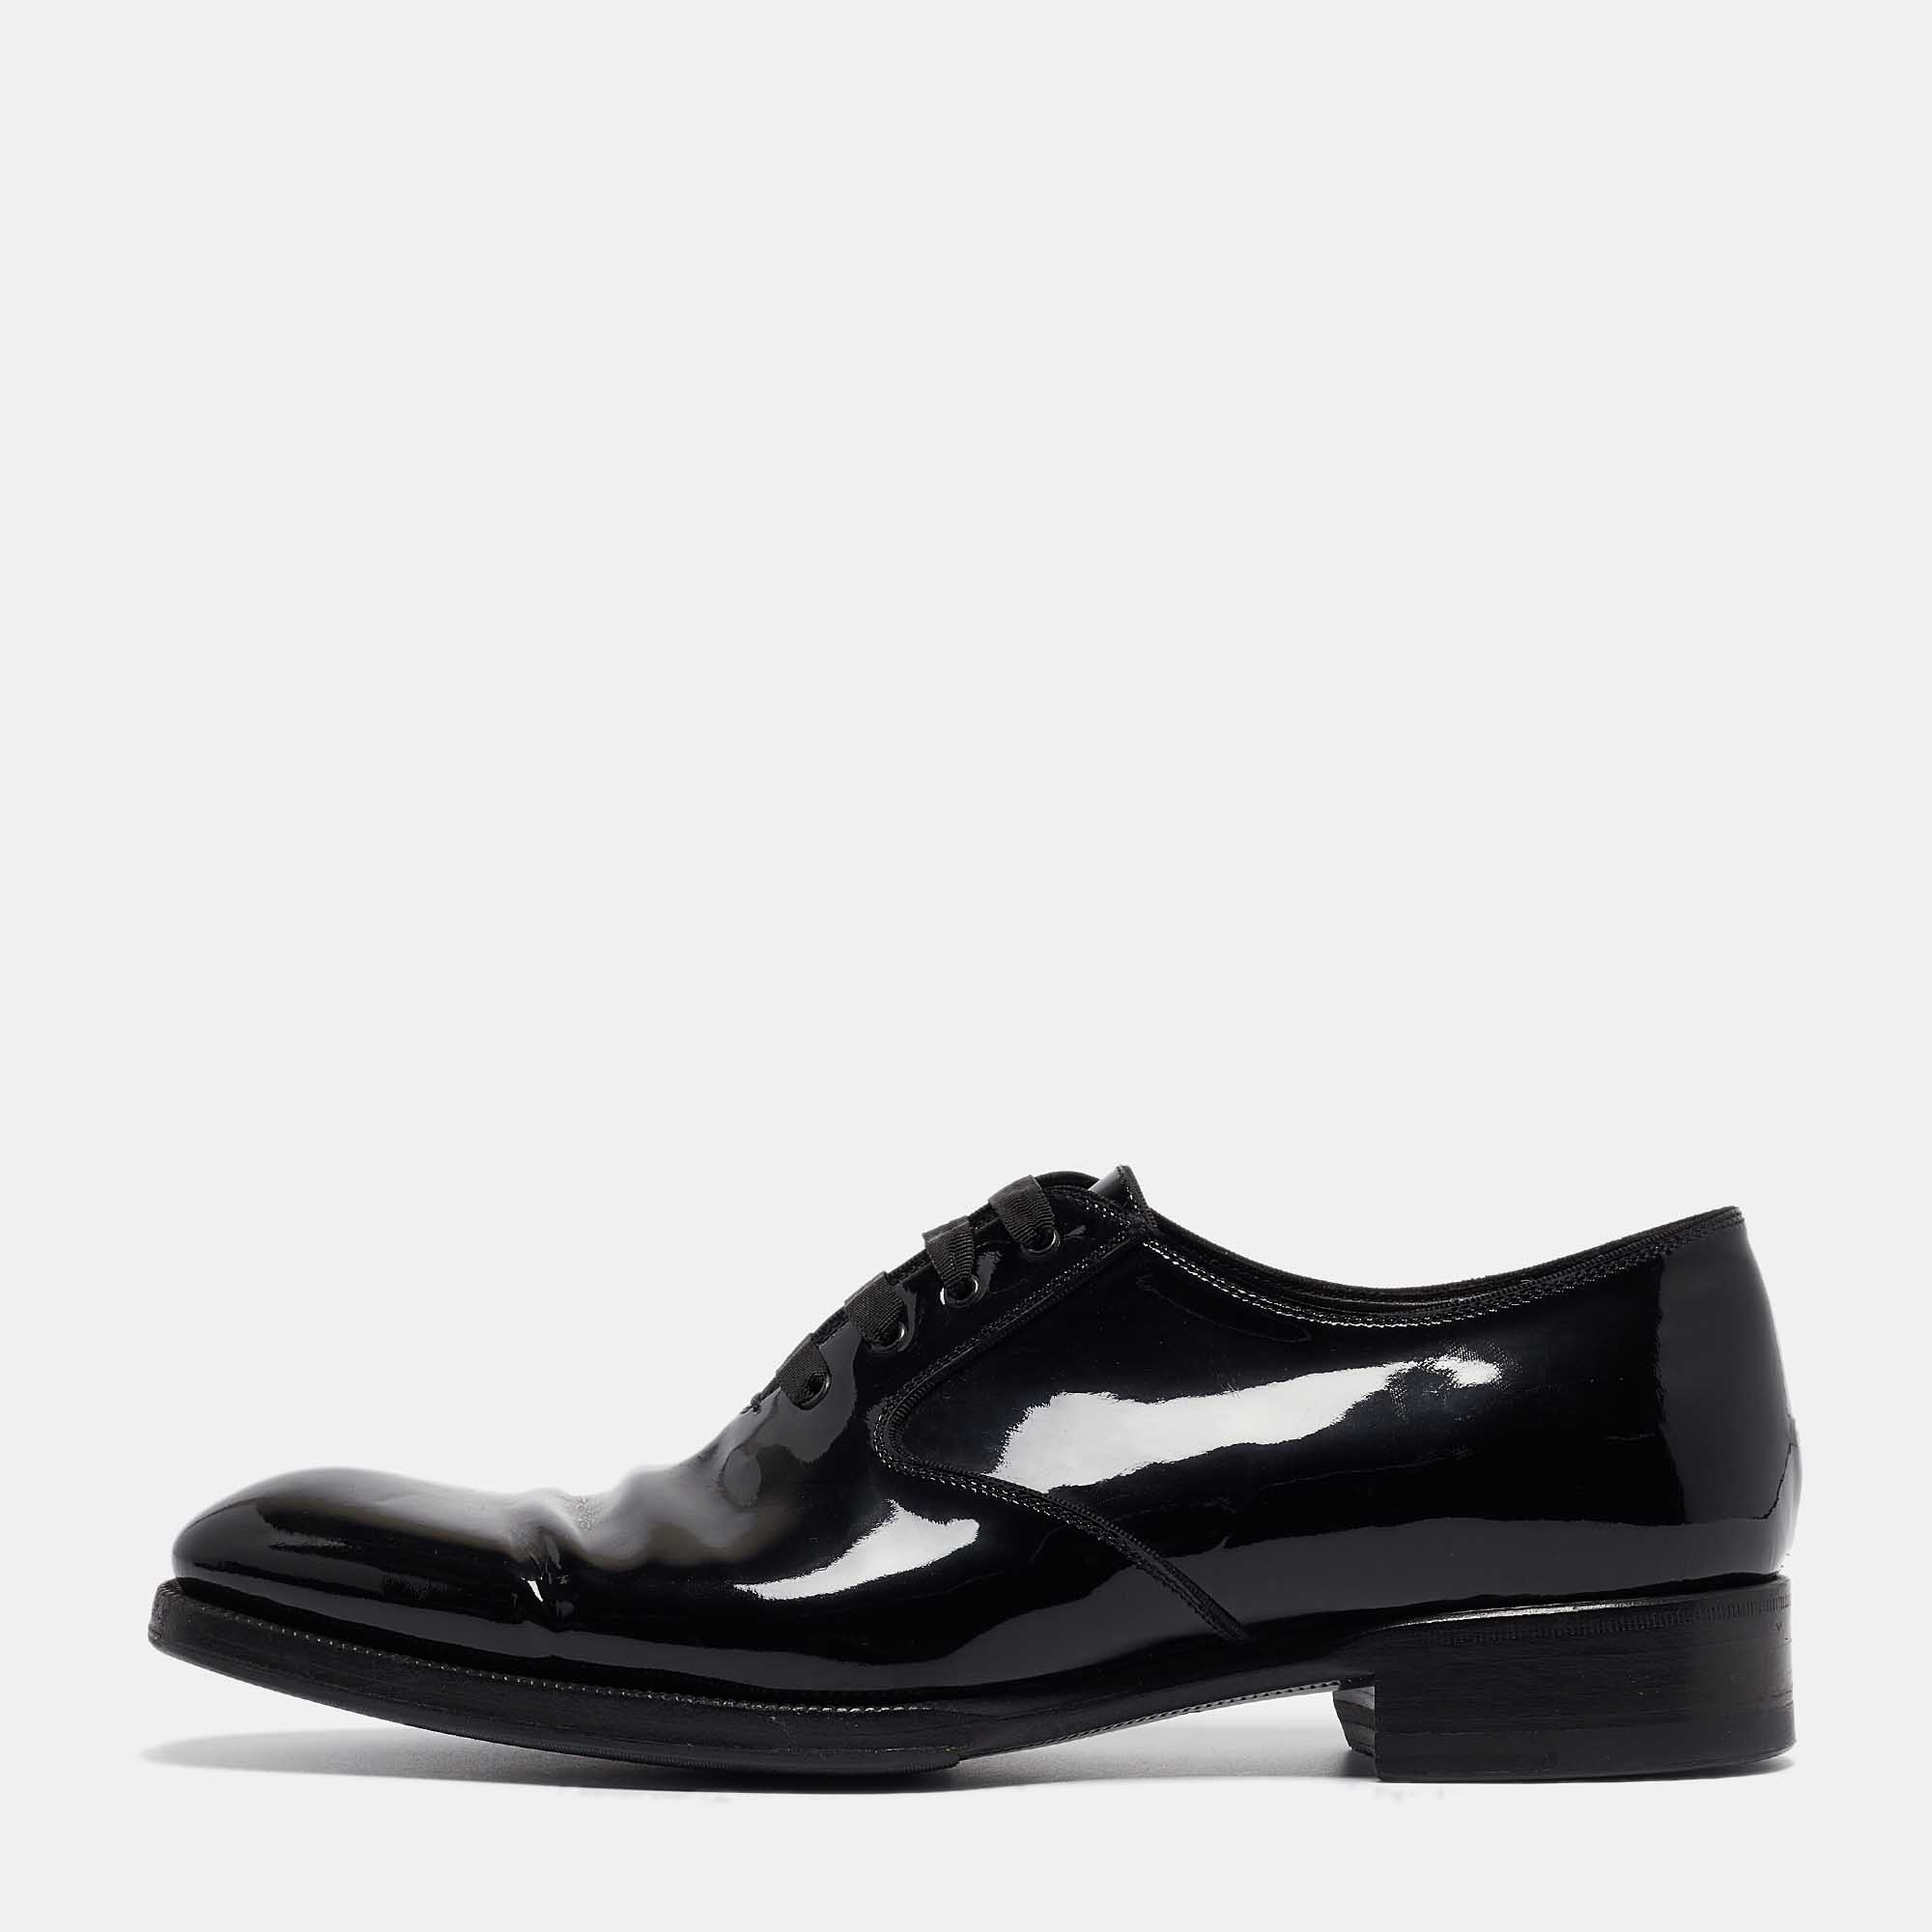 

Tom Ford Black Patent Leather Lace Up Oxfords Size 43.5